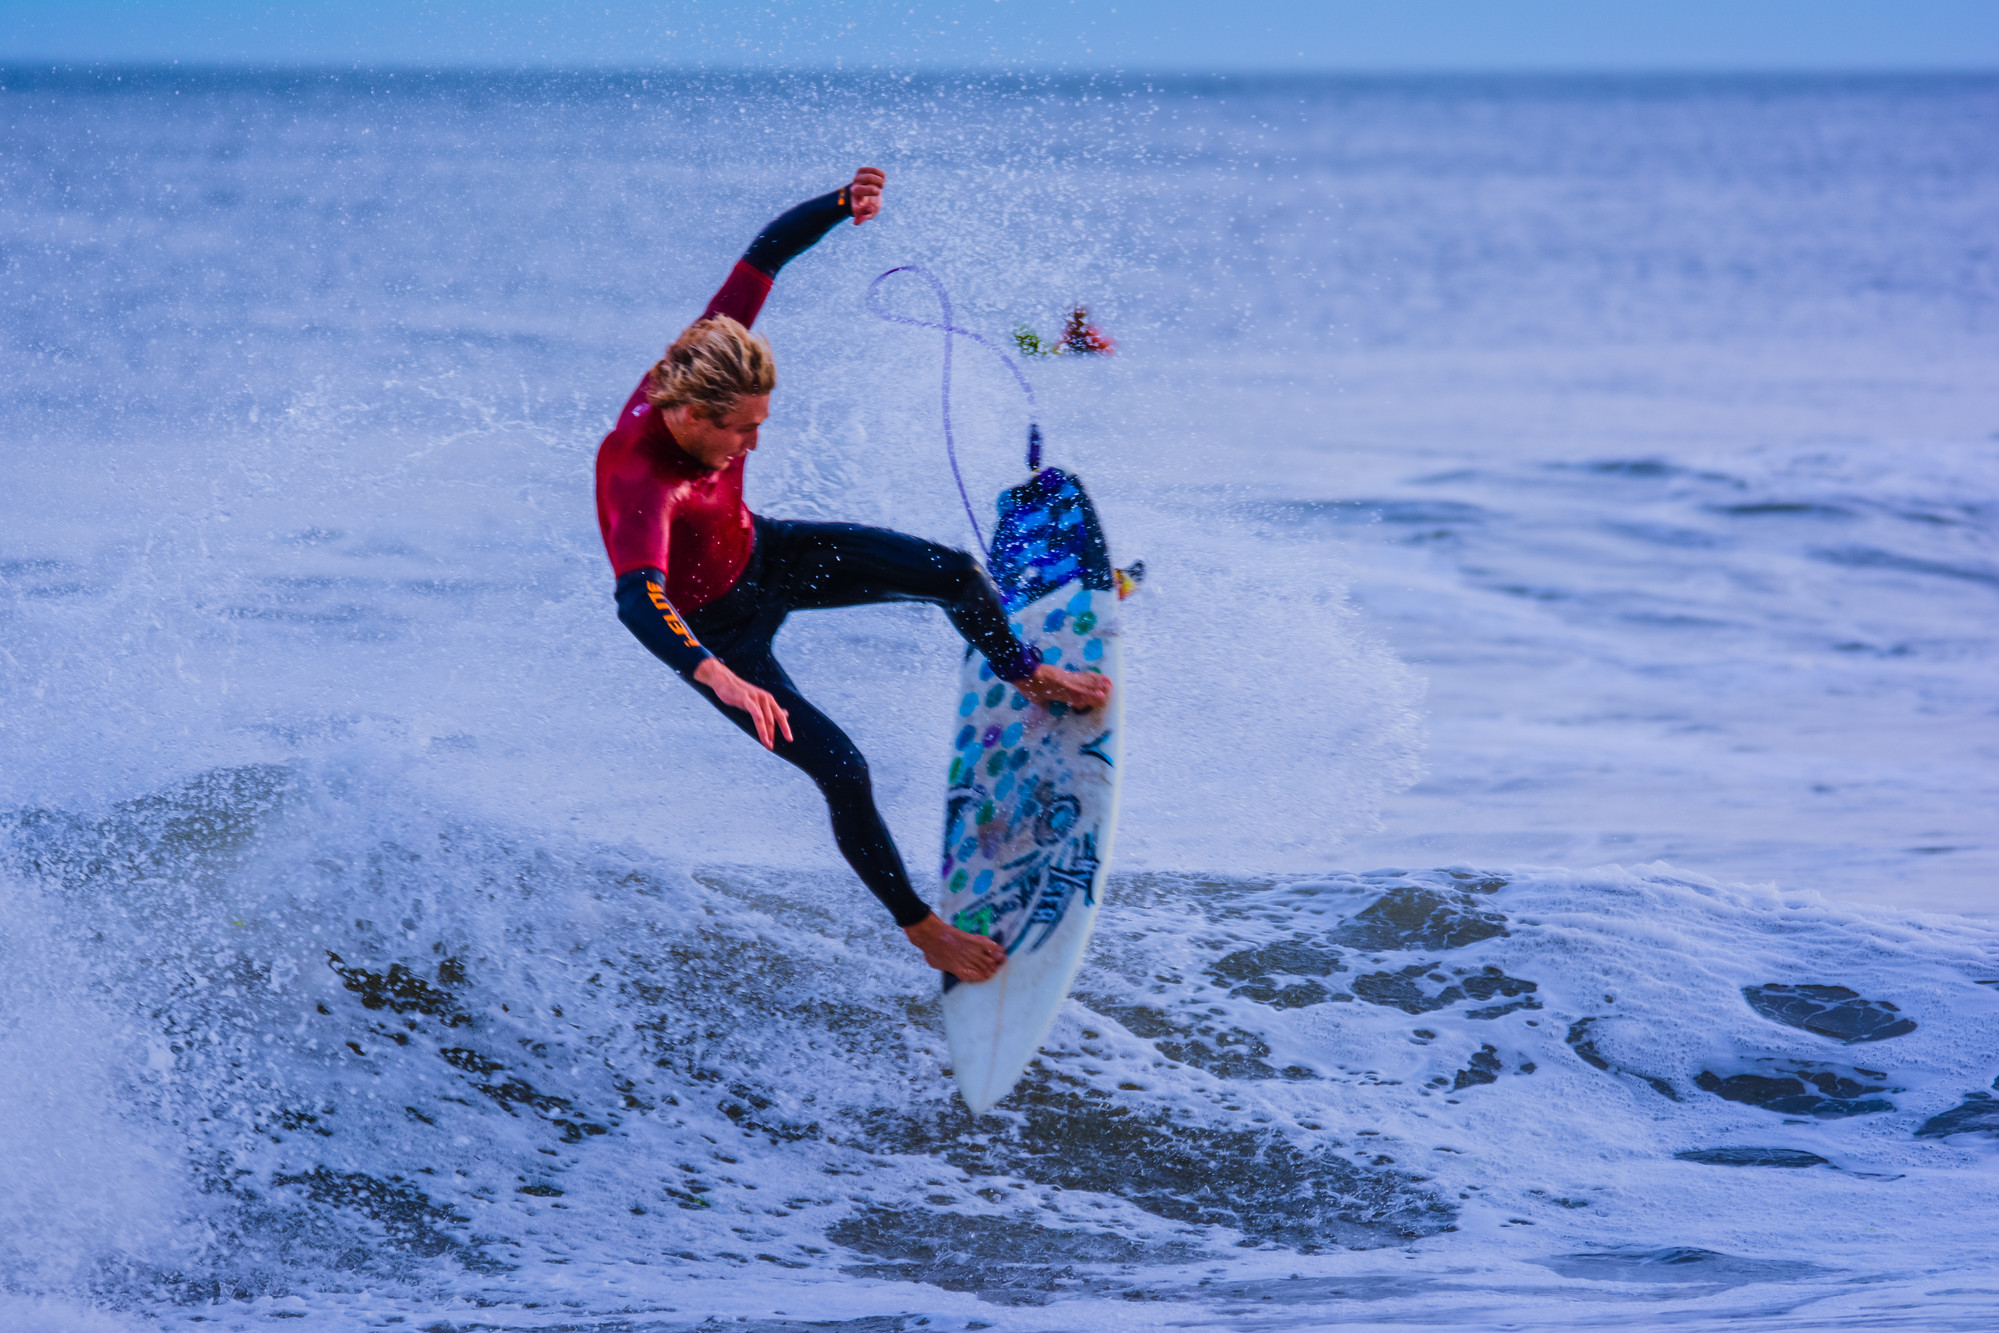 Professional surfer Leif Engstrom won the open surfing contest on July 15, part of the sixth annual Surf Week, presented by NYSEA.